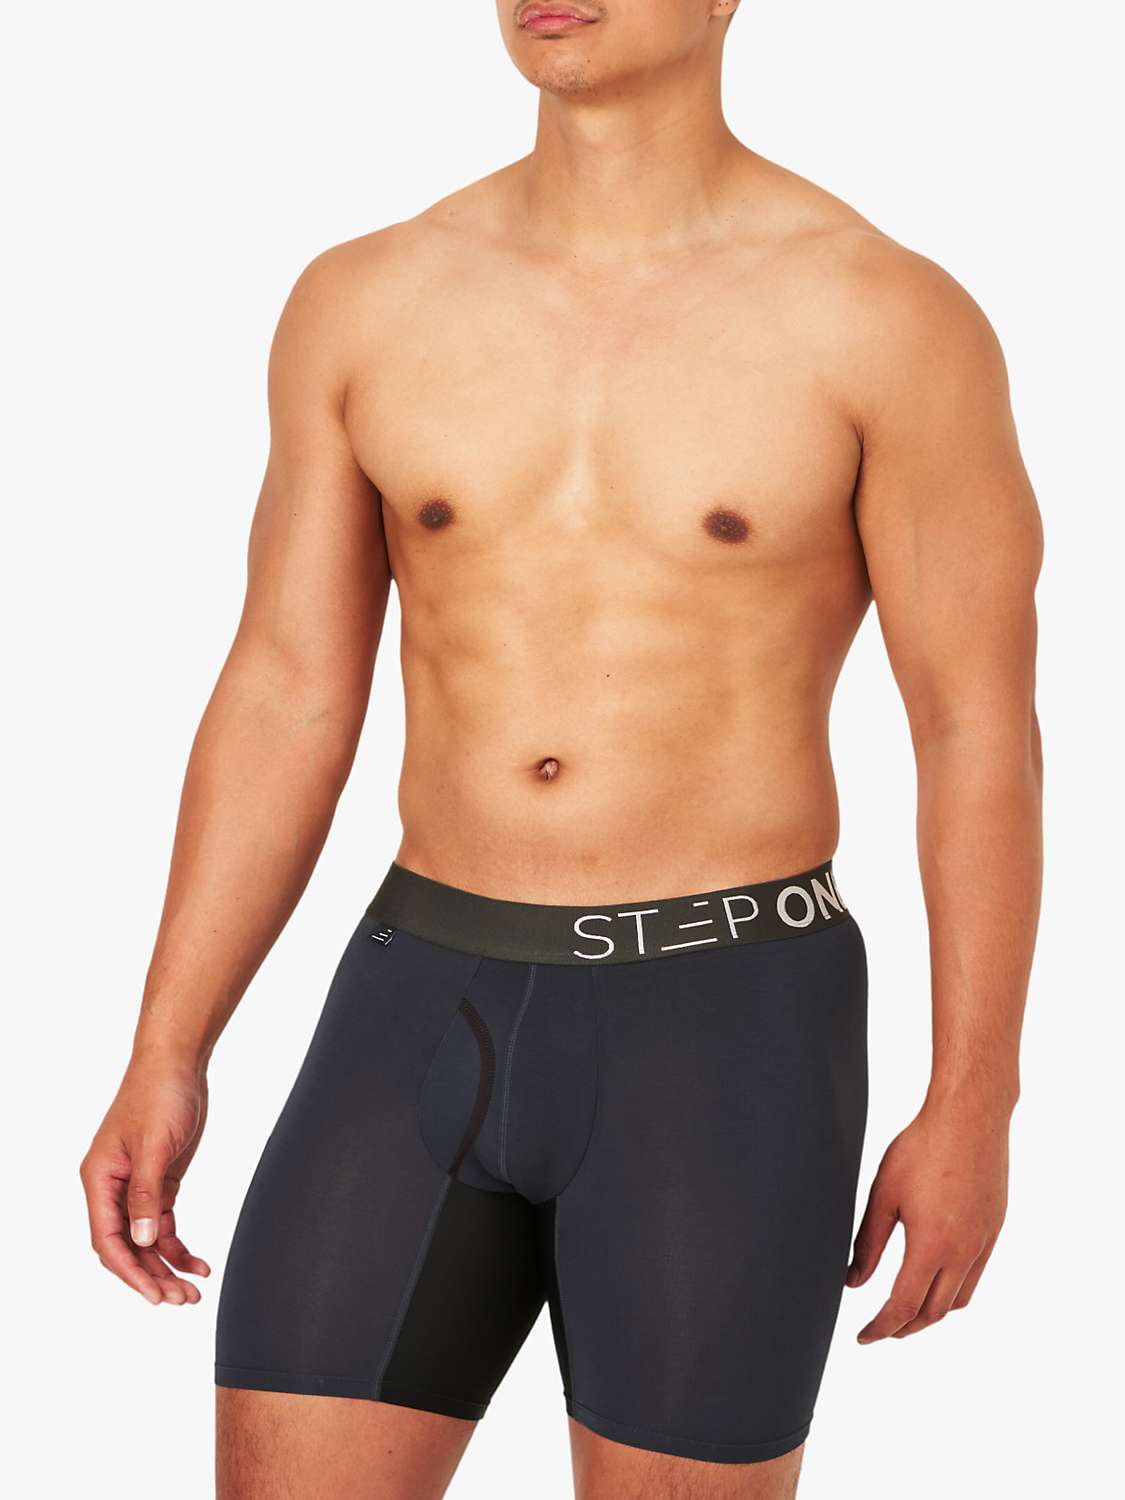 Buy Step One Bamboo Boxer Briefs With Fly Online at johnlewis.com